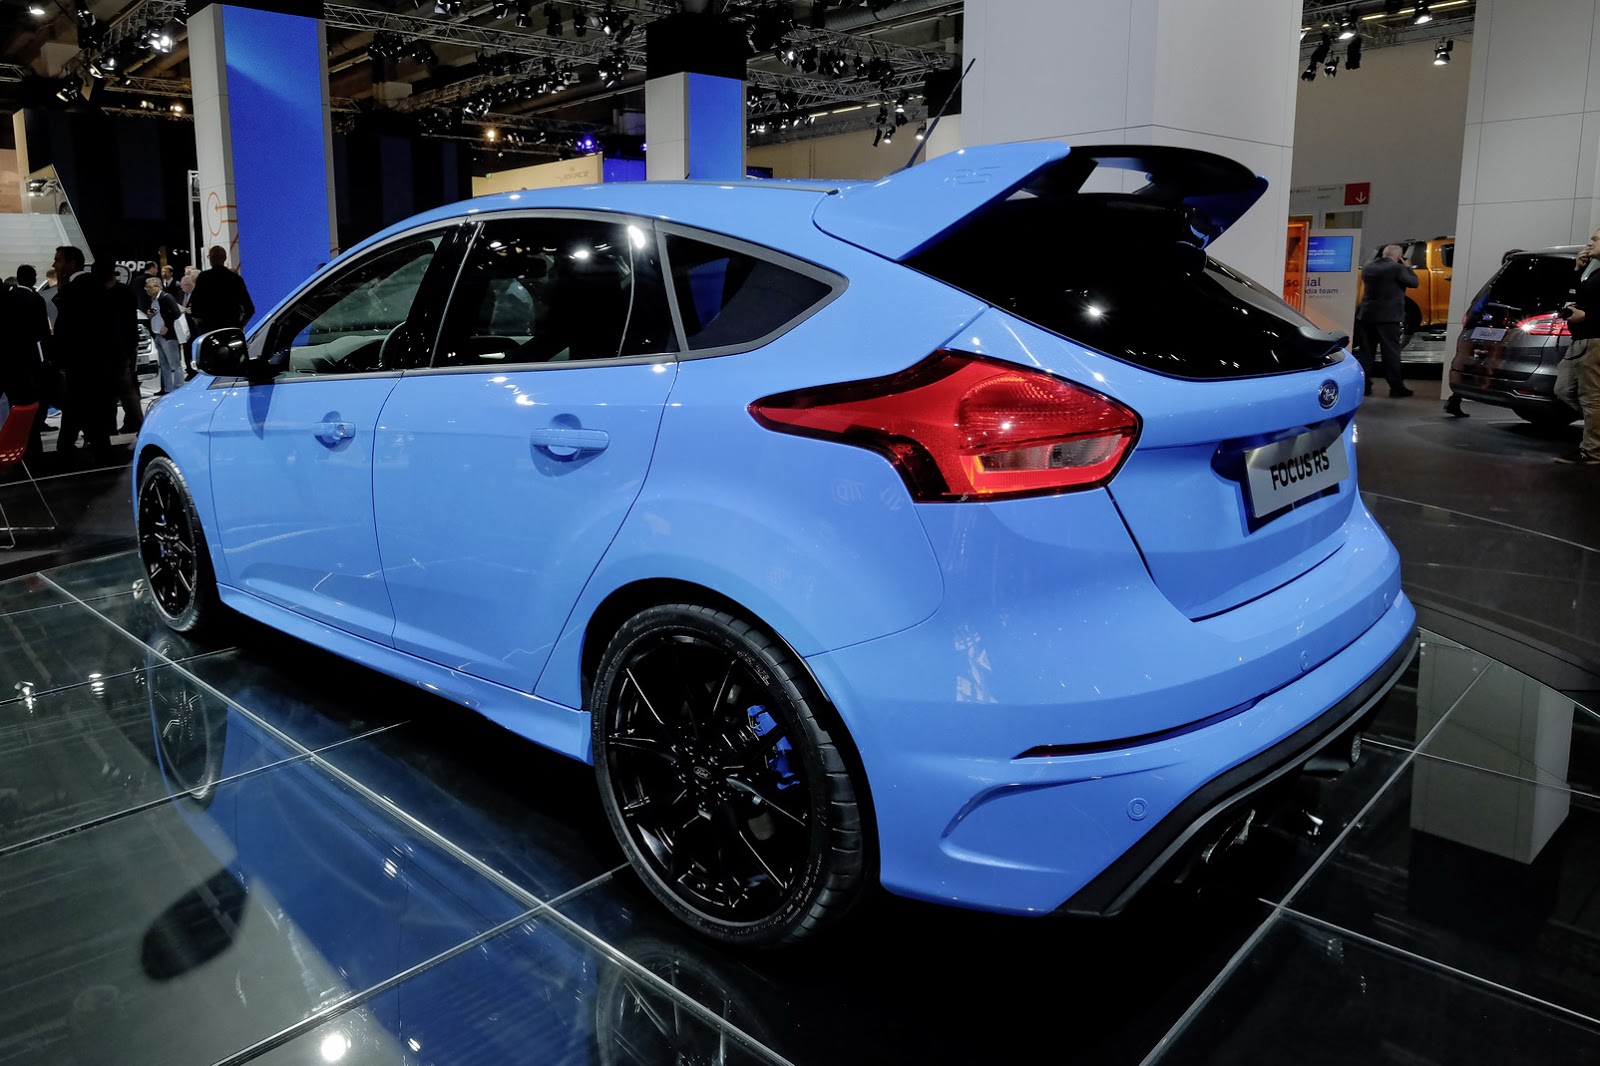 Ford's All-New Focus RS Sprints to 62 MPH in 4.7 Seconds and Hits 165 MPH